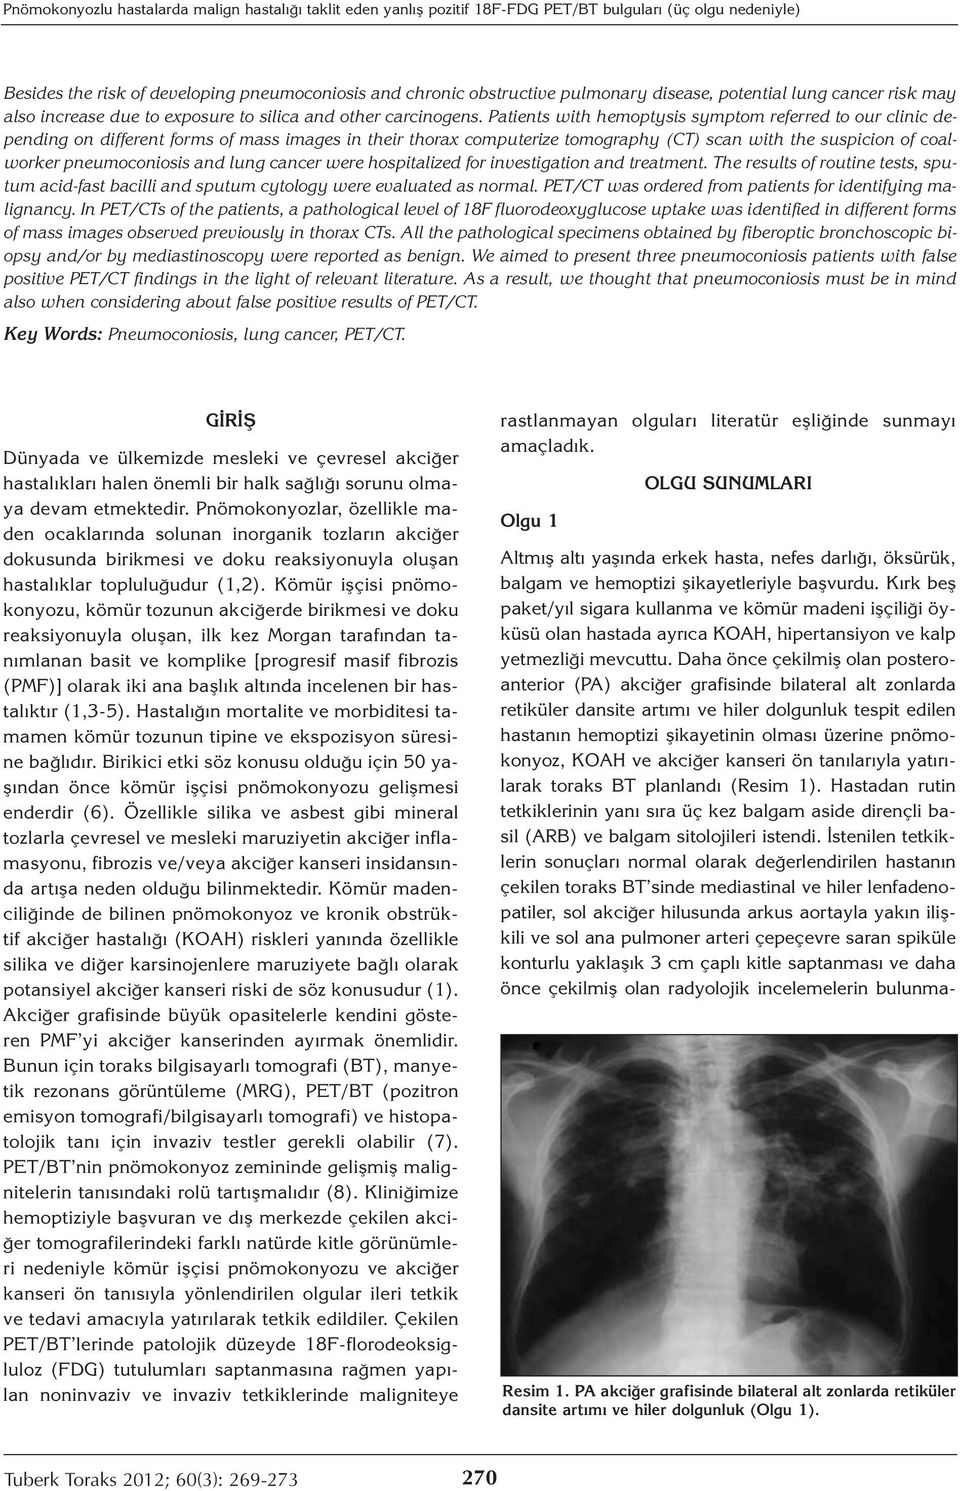 Patients with hemoptysis symptom referred to our clinic depending on different forms of mass images in their thorax computerize tomography (CT) scan with the suspicion of coalworker pneumoconiosis